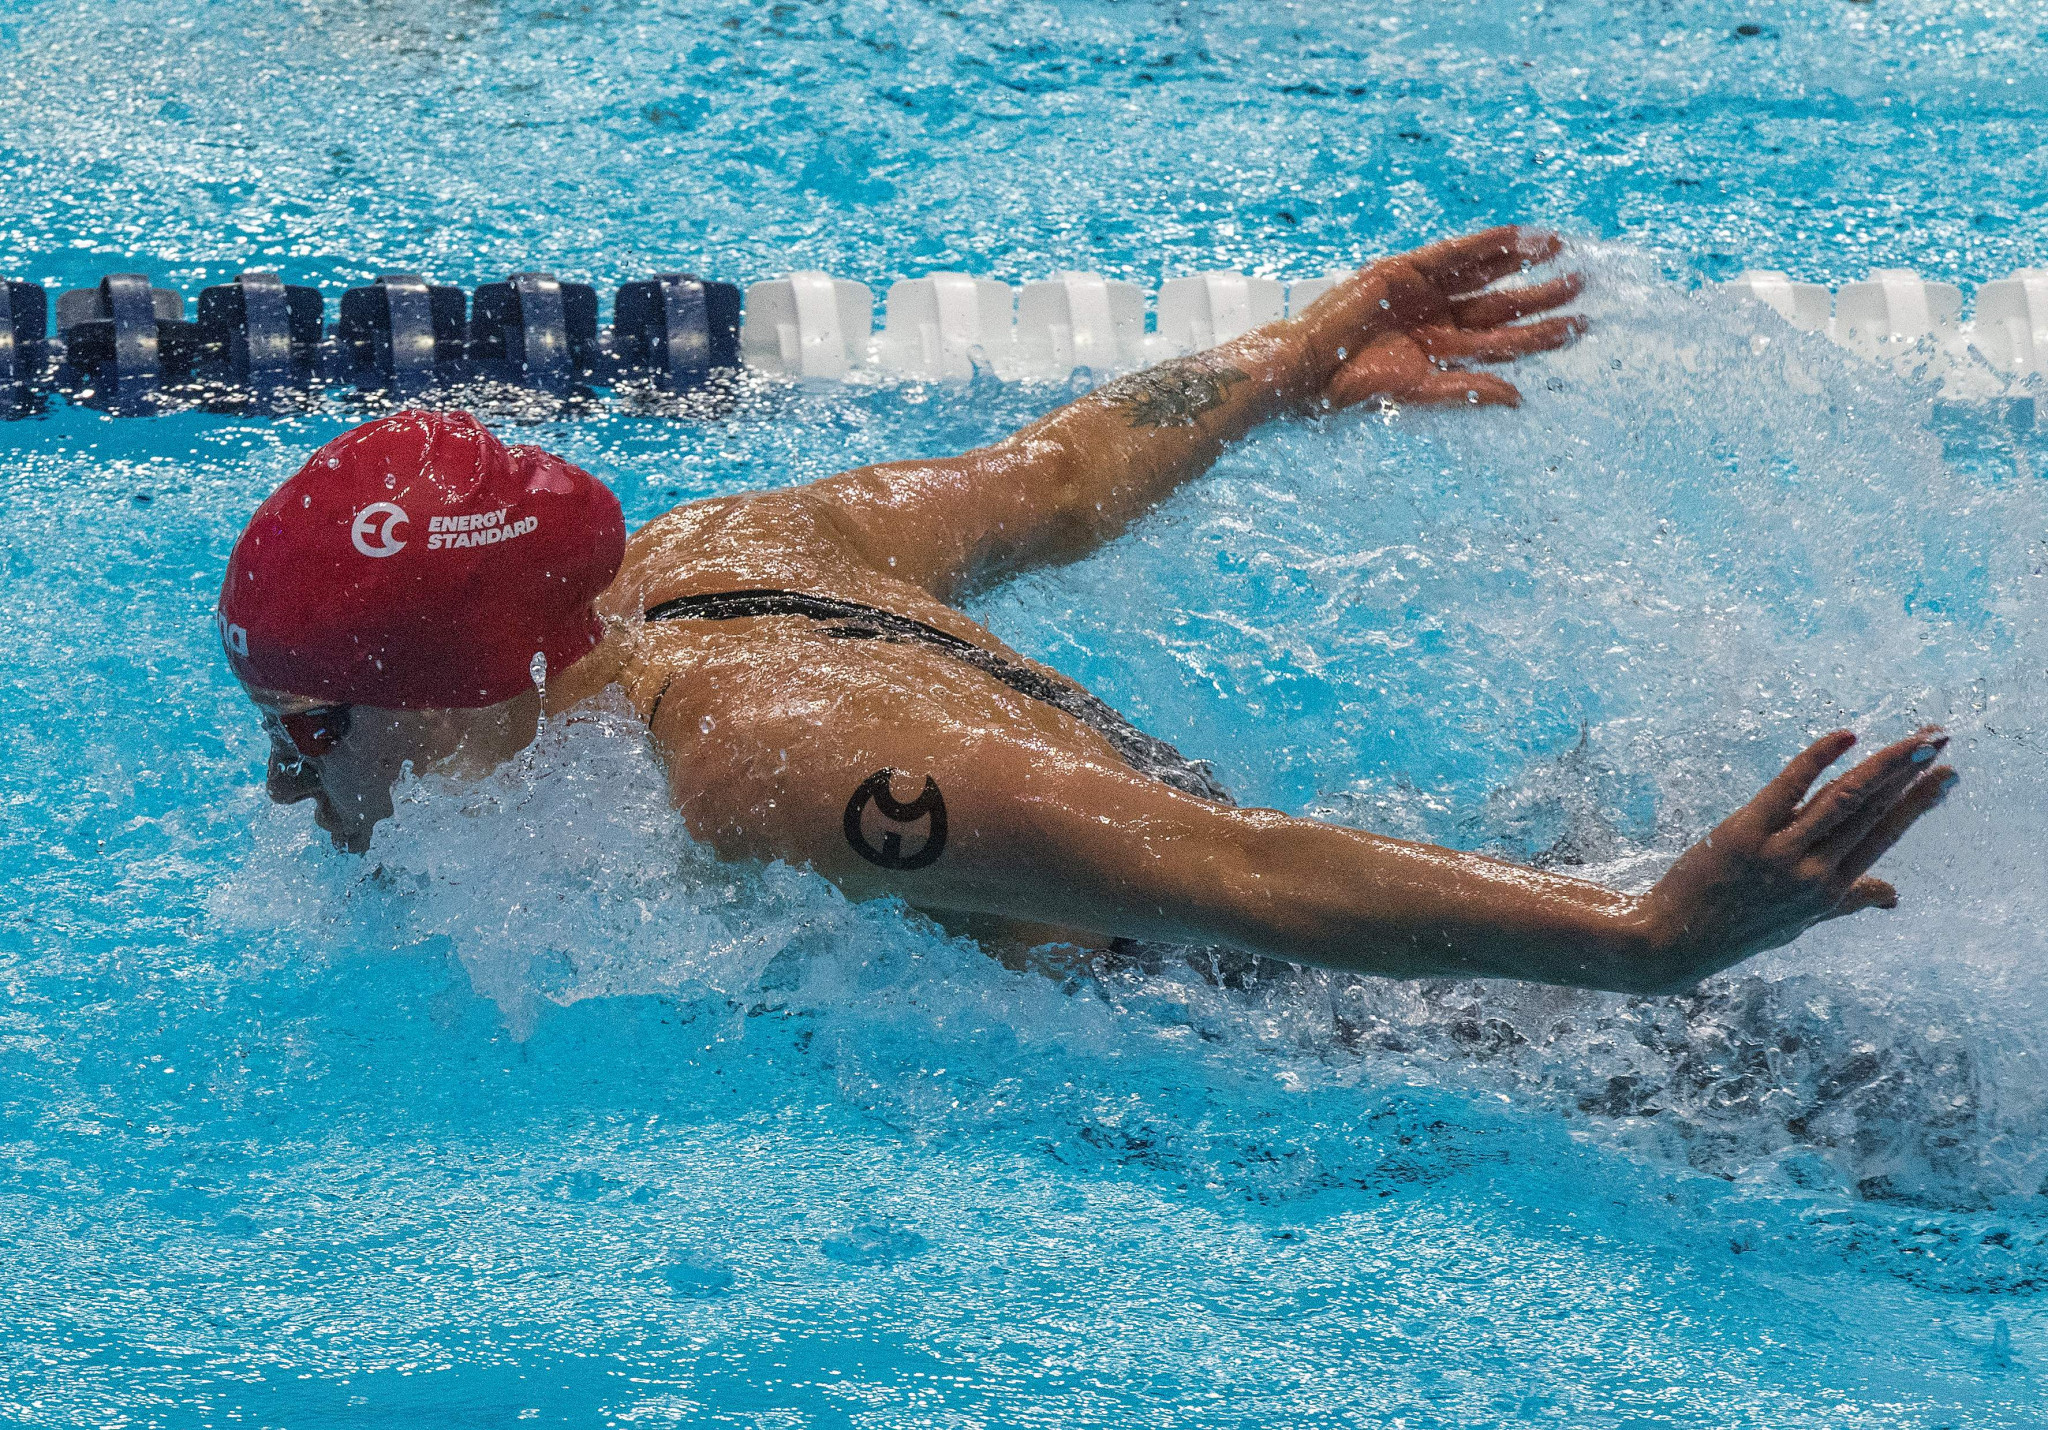 Energy Standard beat Cali Condors to defend International Swimming League title